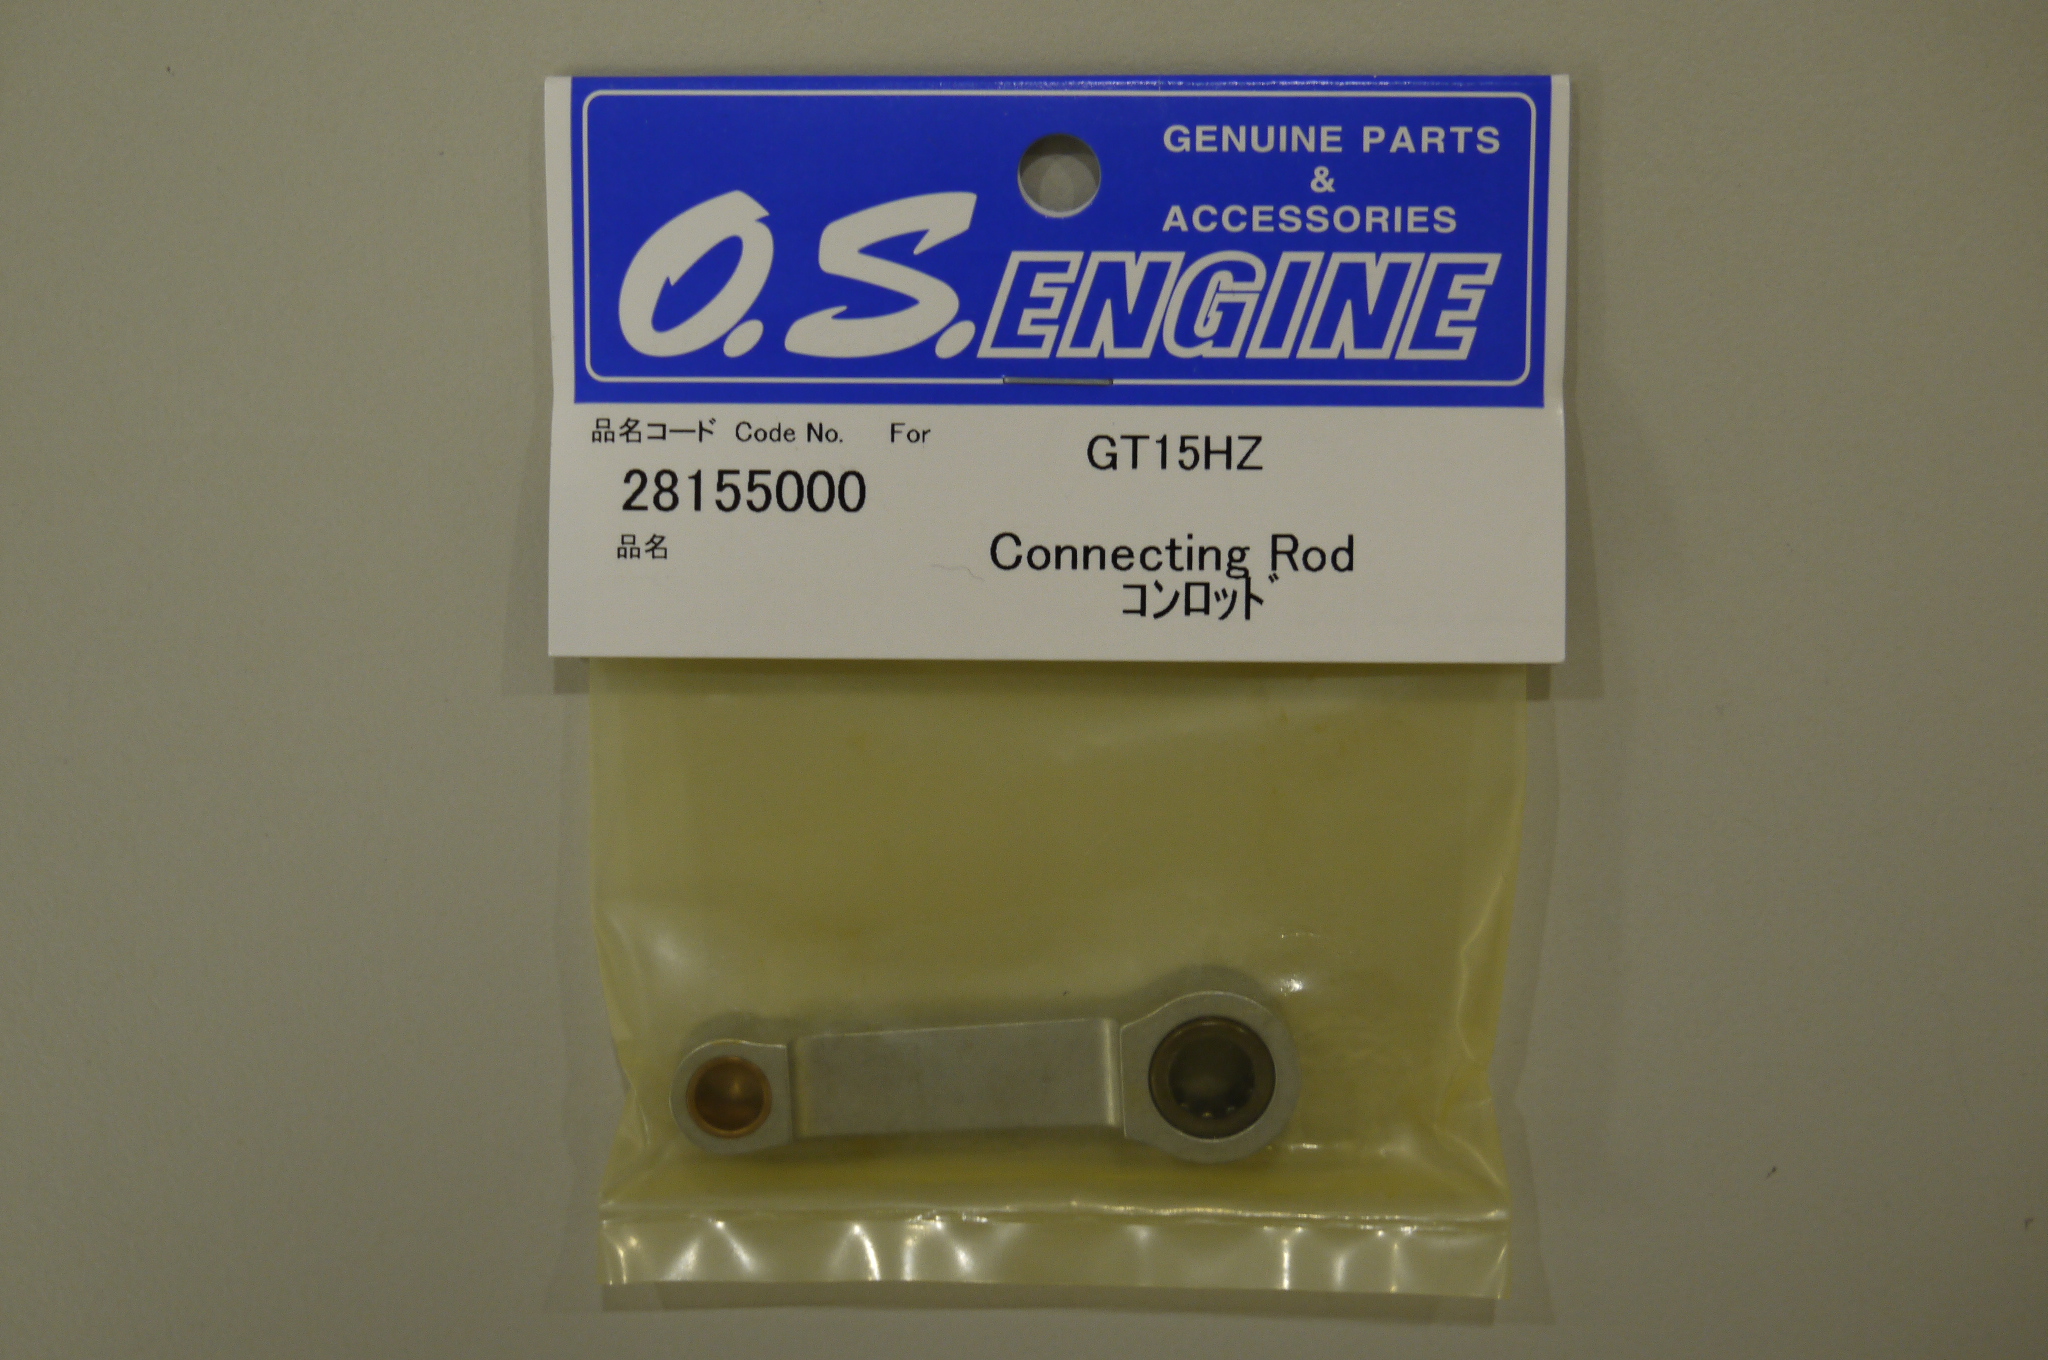 Engines 29125000 Connecting Rod 120AX Vehicle Part O.S